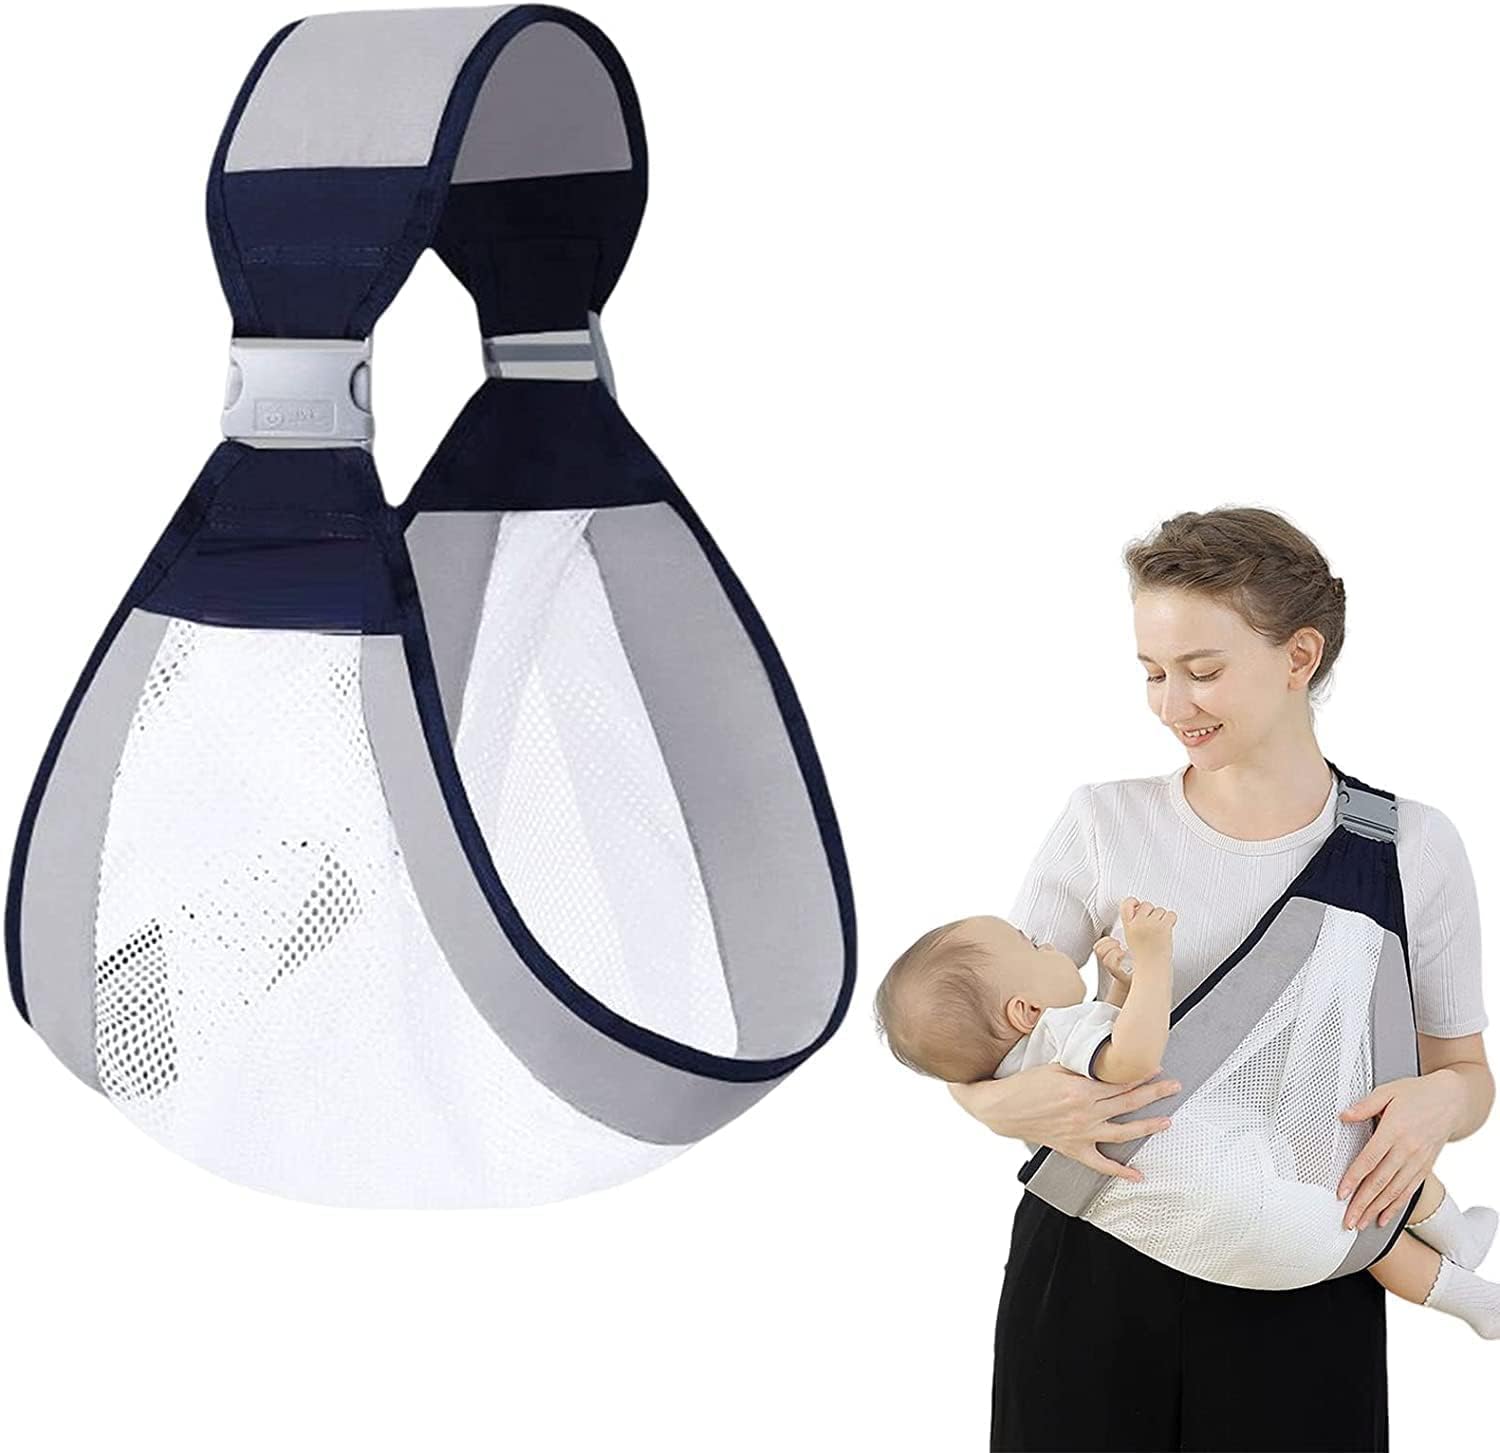 SkyShopy Baby Carrier Newborn to Toddler, Ergonomic 3D Mesh Baby Wraps Carrier, Adjustable Baby Sling, Lightweight Breathable Baby Carrier Wrap with Thick Shoulder Straps for 0-36 Months Infant